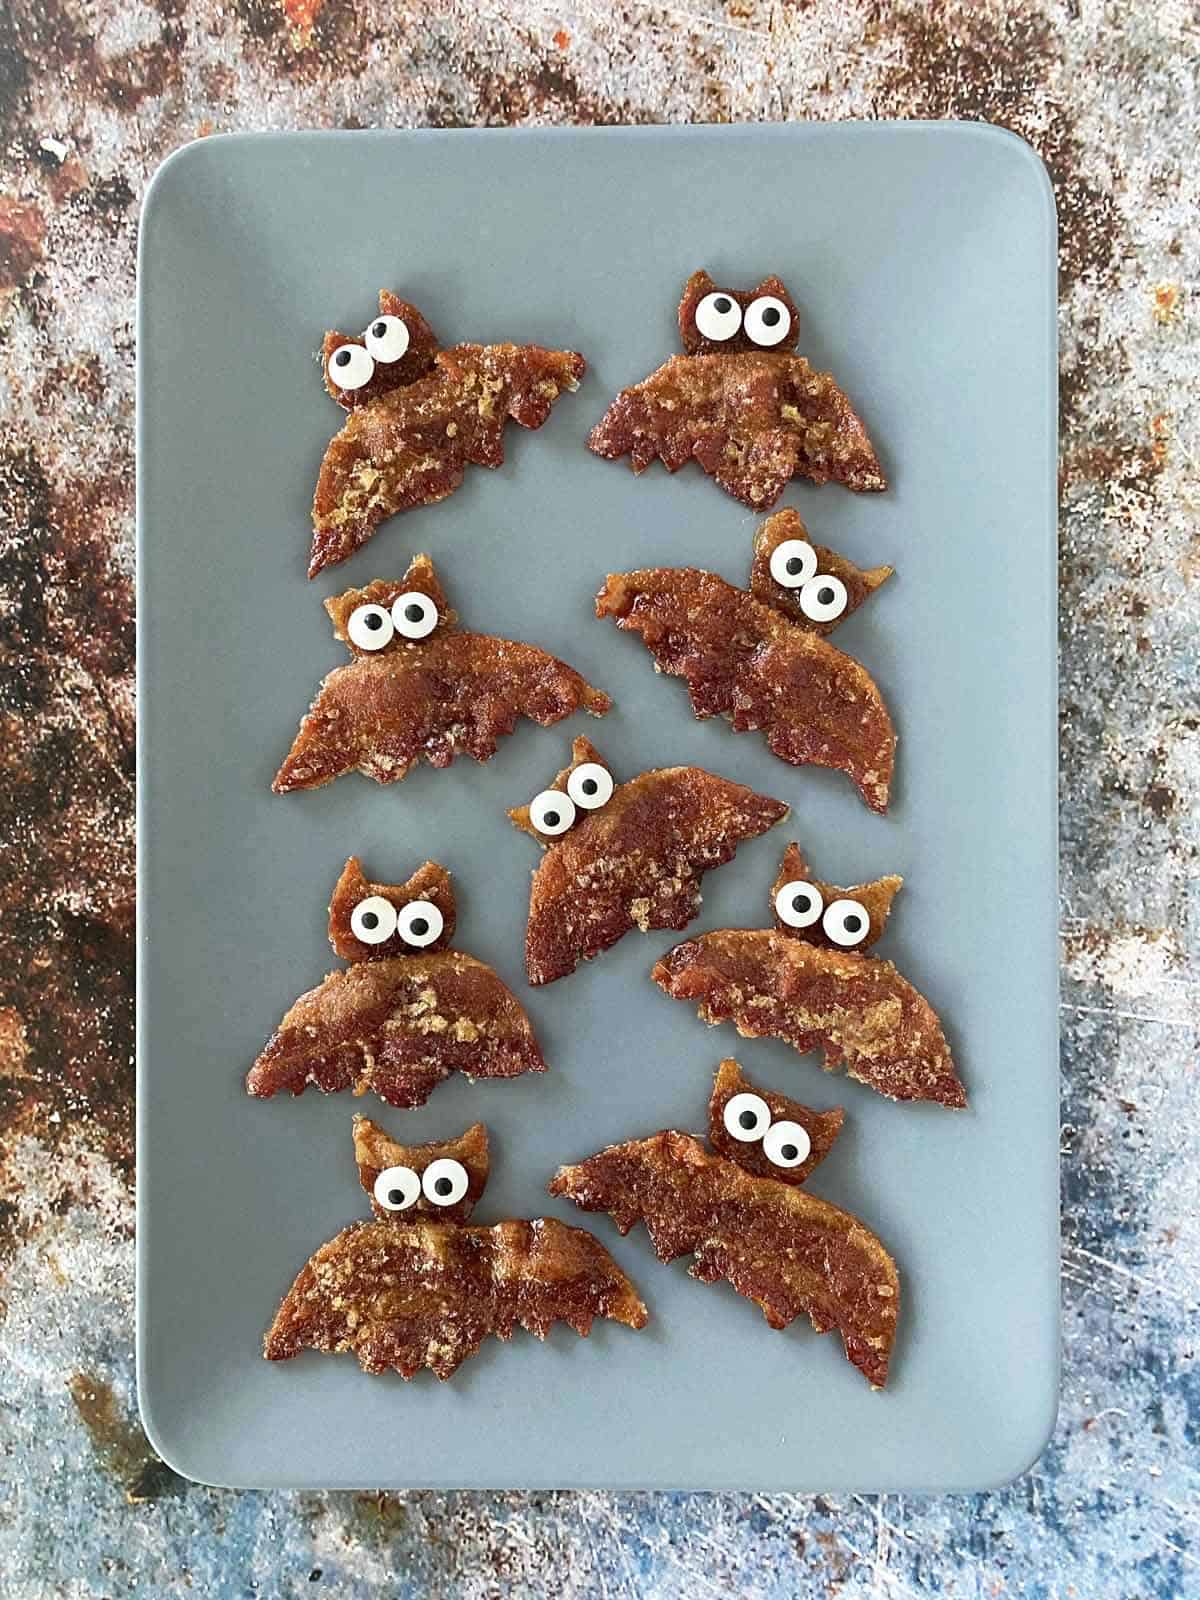 10 pieces of Halloween bacon bats on a gray serving platter.